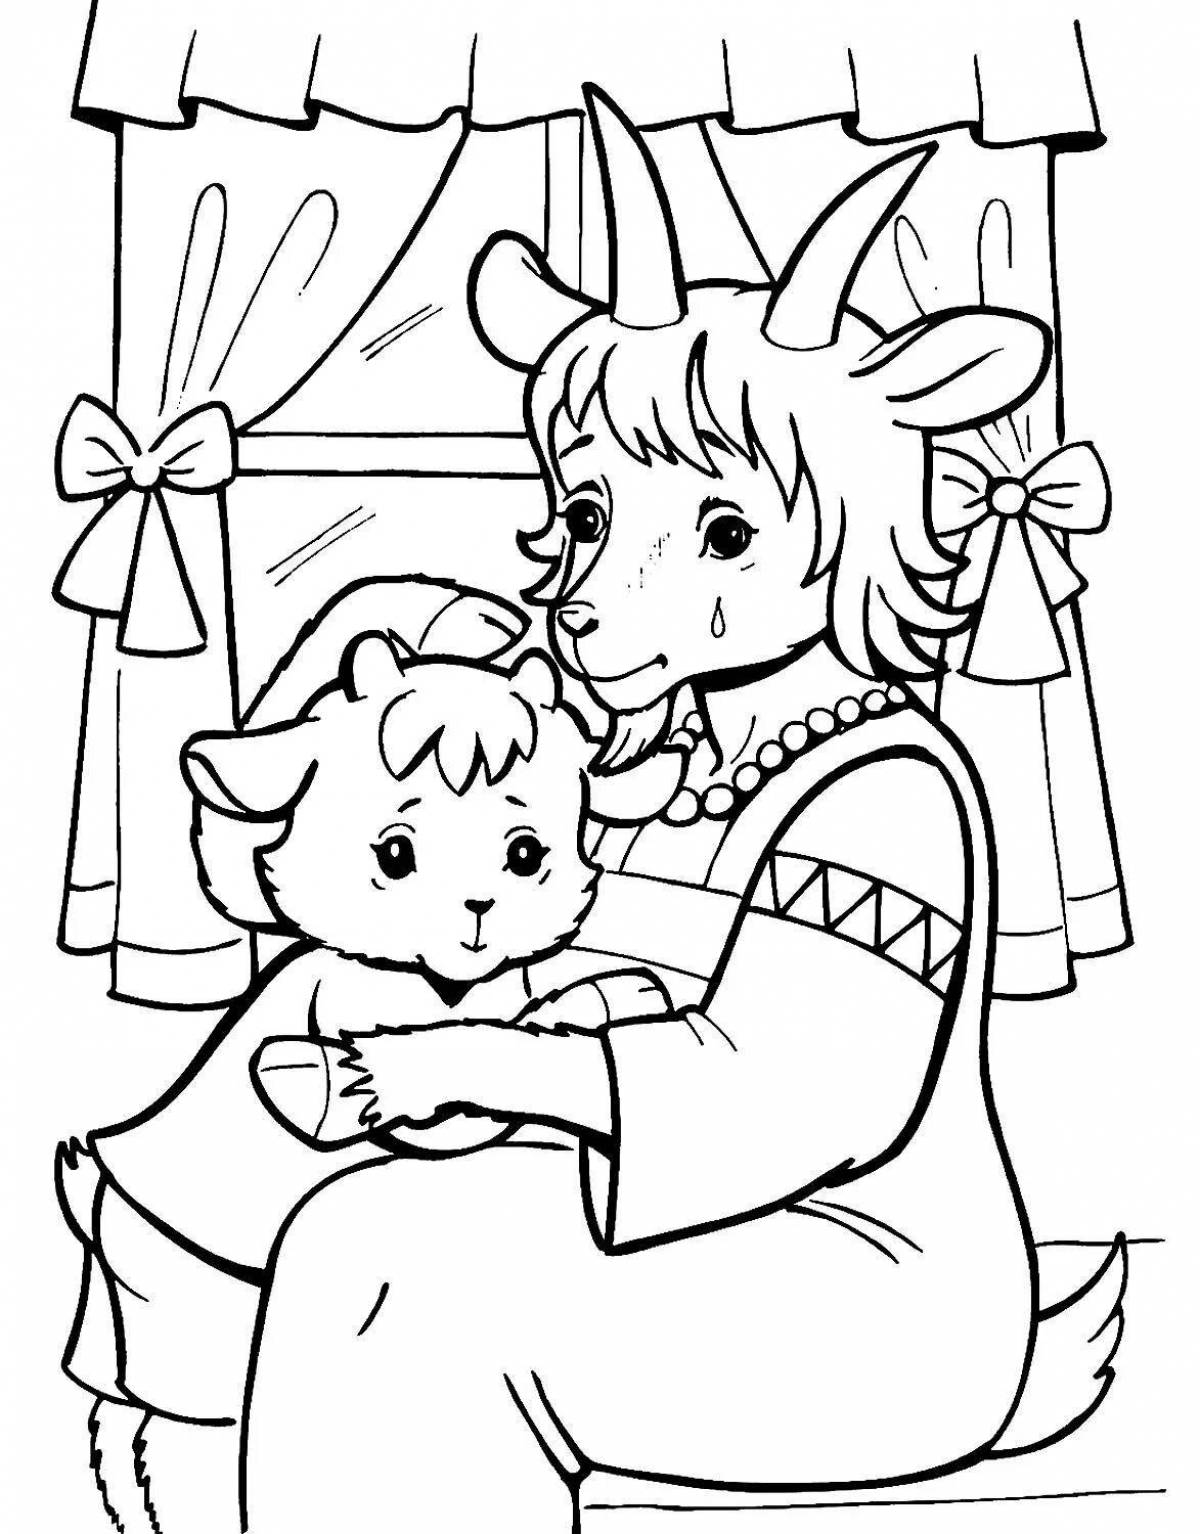 Coloring page cute wolf and seven kids